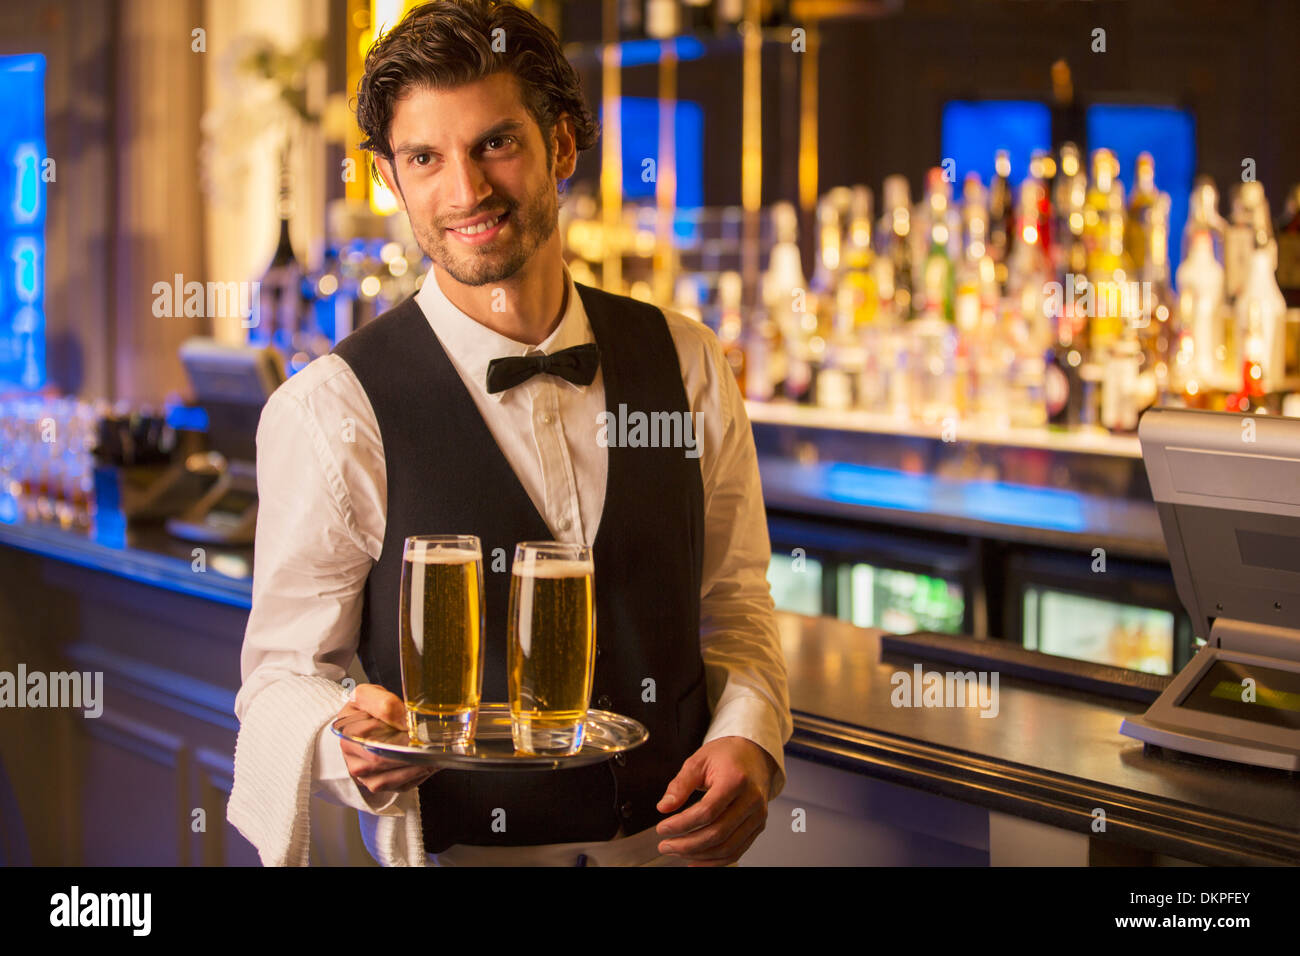 Portrait of well dressed bartender carrying beers on tray Stock Photo